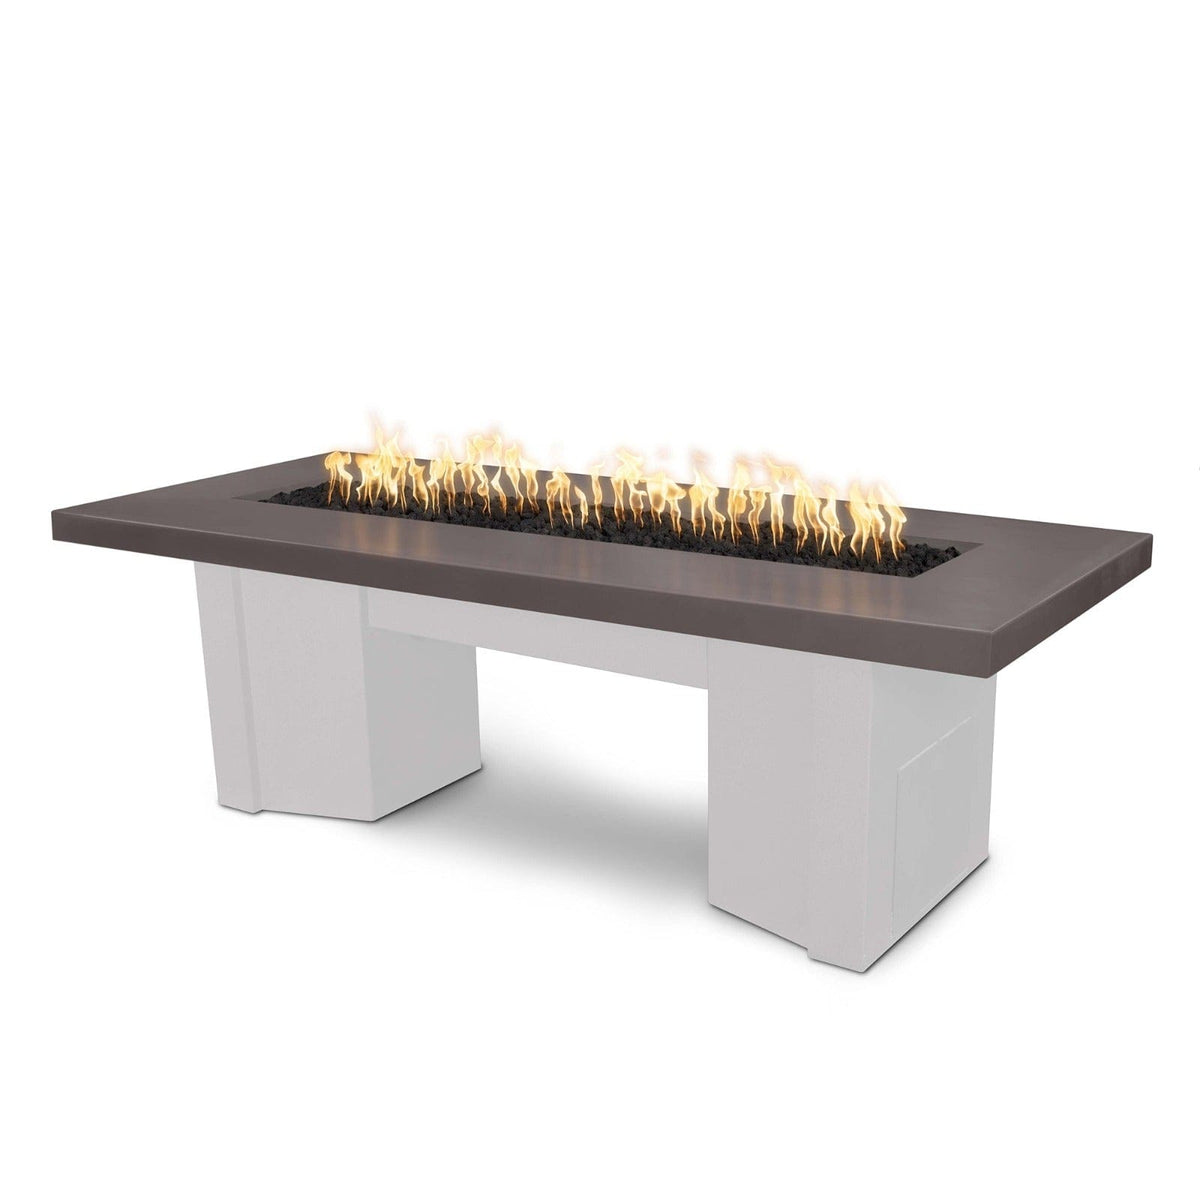 The Outdoor Plus Fire Features Chestnut (-CST) / White Powder Coated Steel (-WHT) The Outdoor Plus 60&quot; Alameda Fire Table Smooth Concrete in Liquid Propane - 110V Plug &amp; Play Electronic Ignition / OPT-ALMGFRC60EKIT-LP